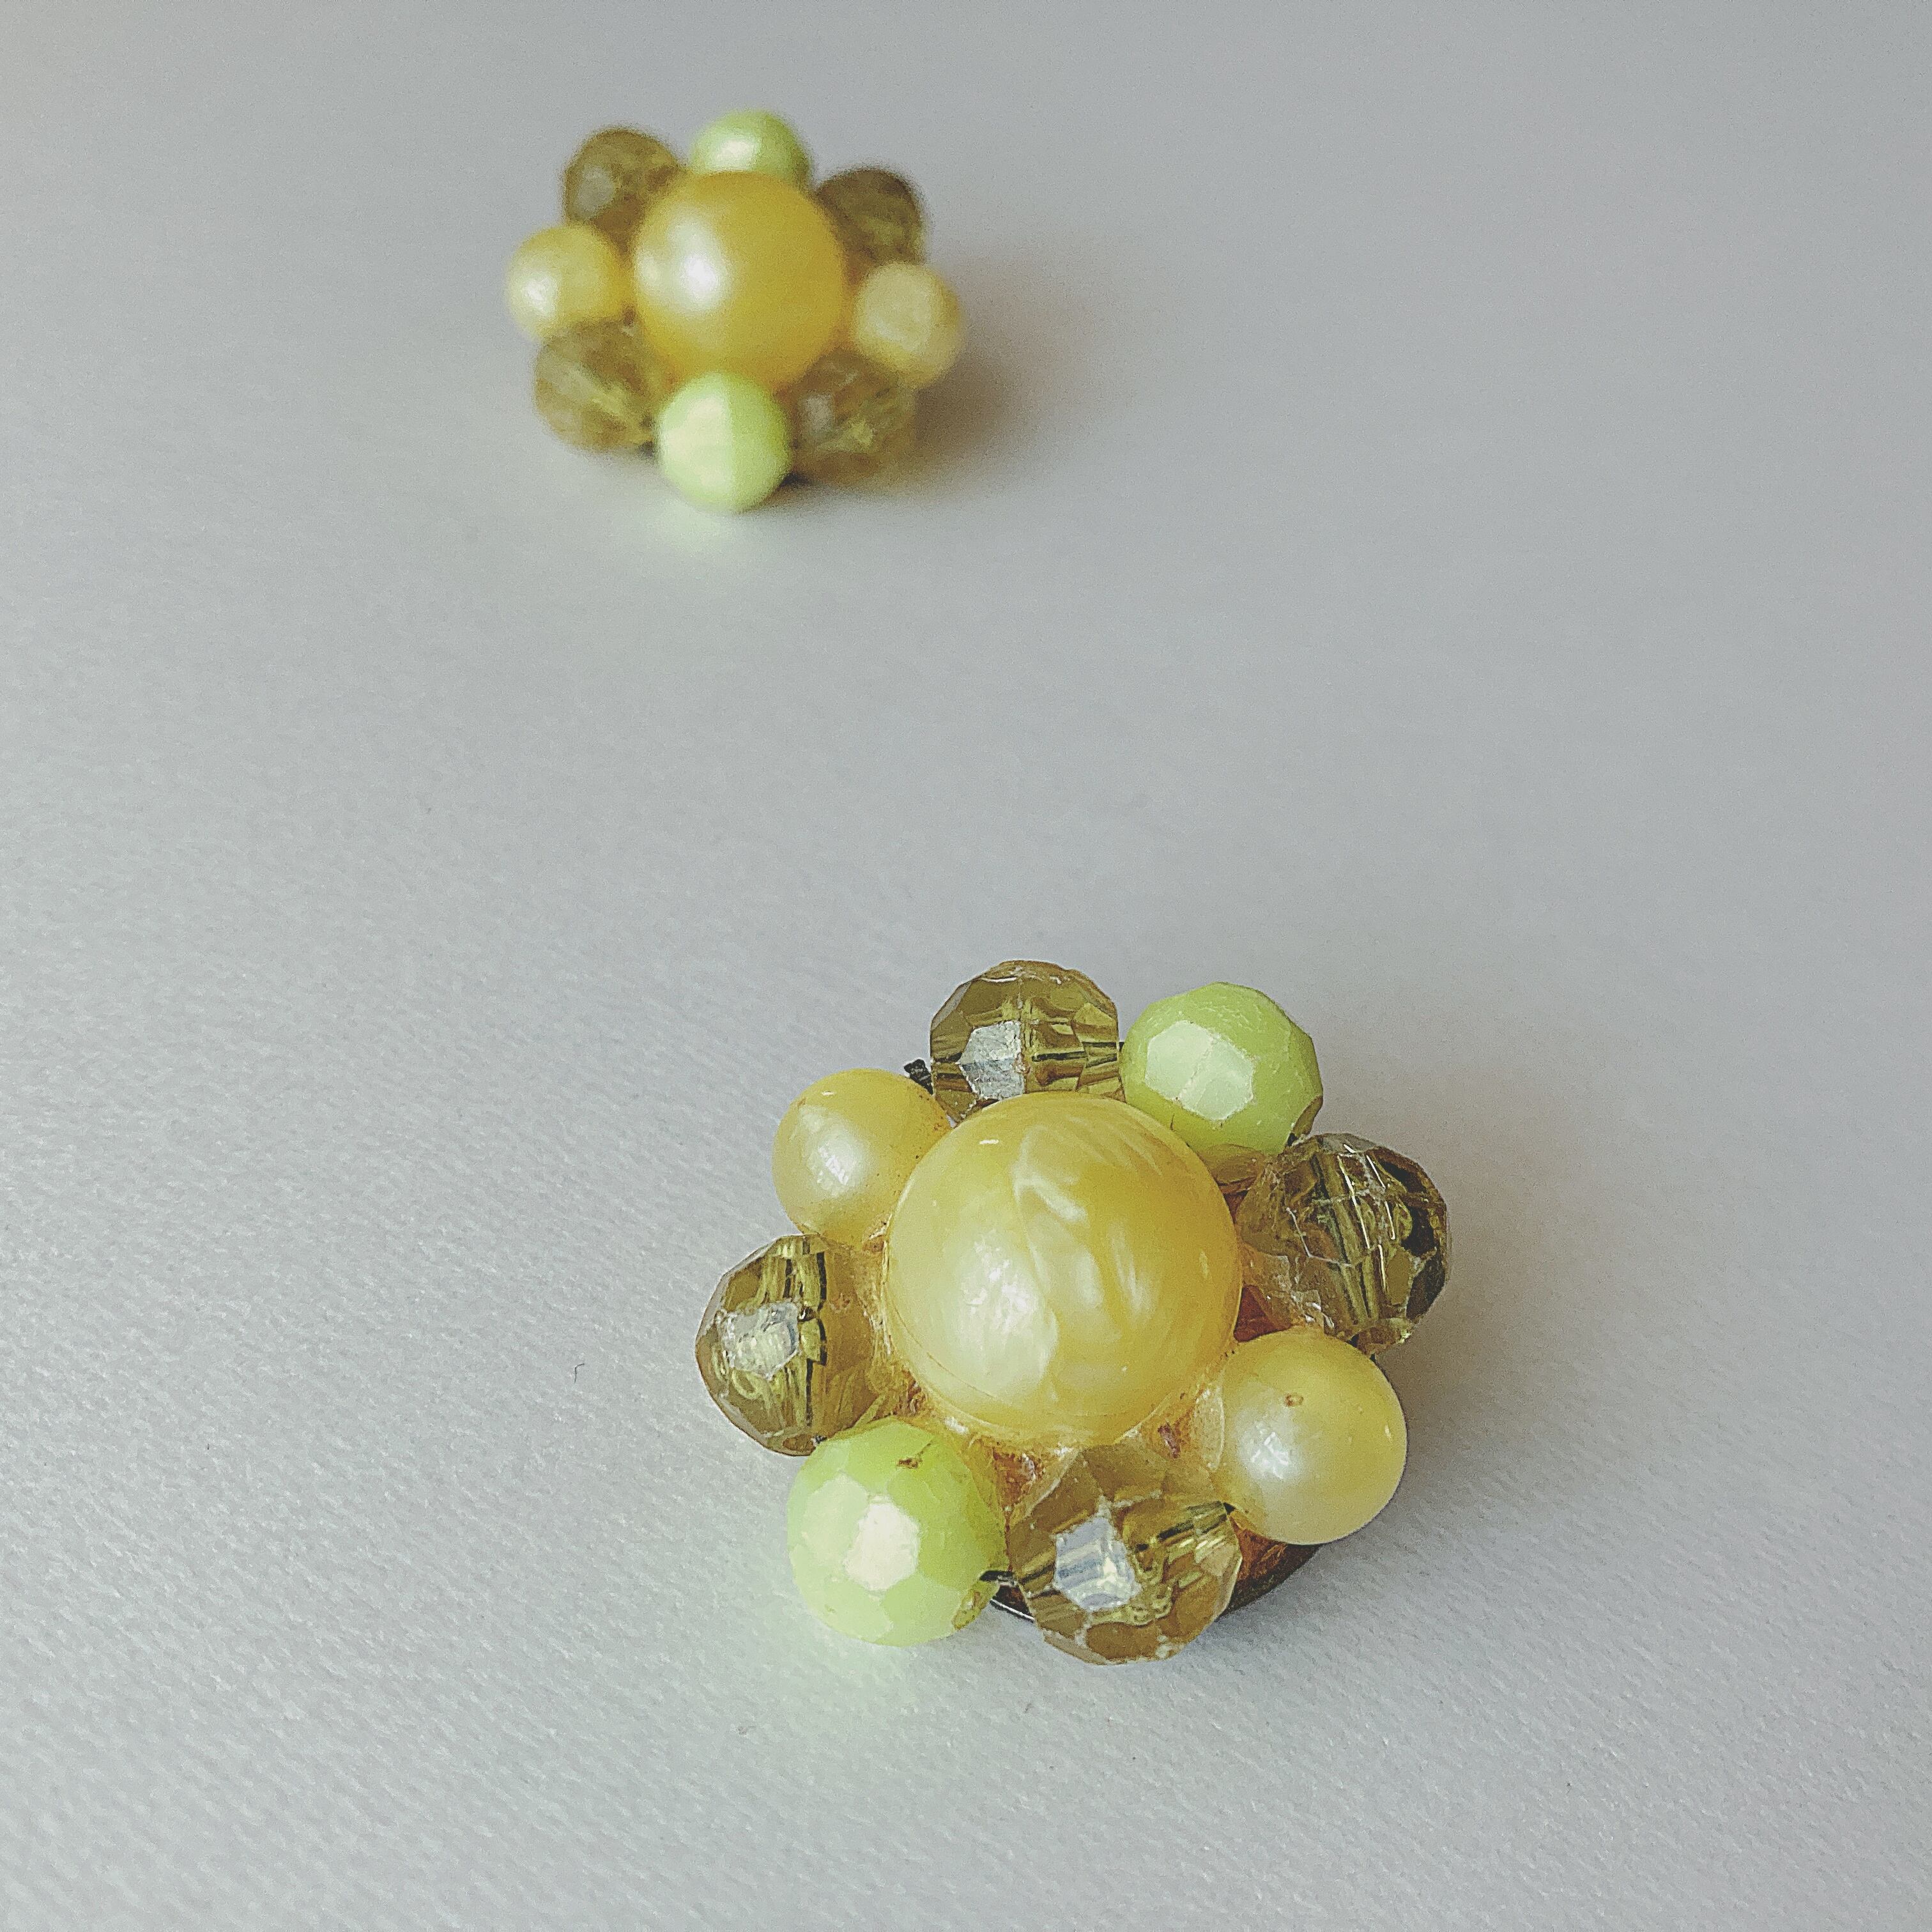 Vintage 50s 60s yellow green beads flower cluster earrings ヴィンテージ 50年代  60年代 イエロー グリーン ビーズ フラワー 花 クラスター イヤリング b1677 OBAKEPEACH